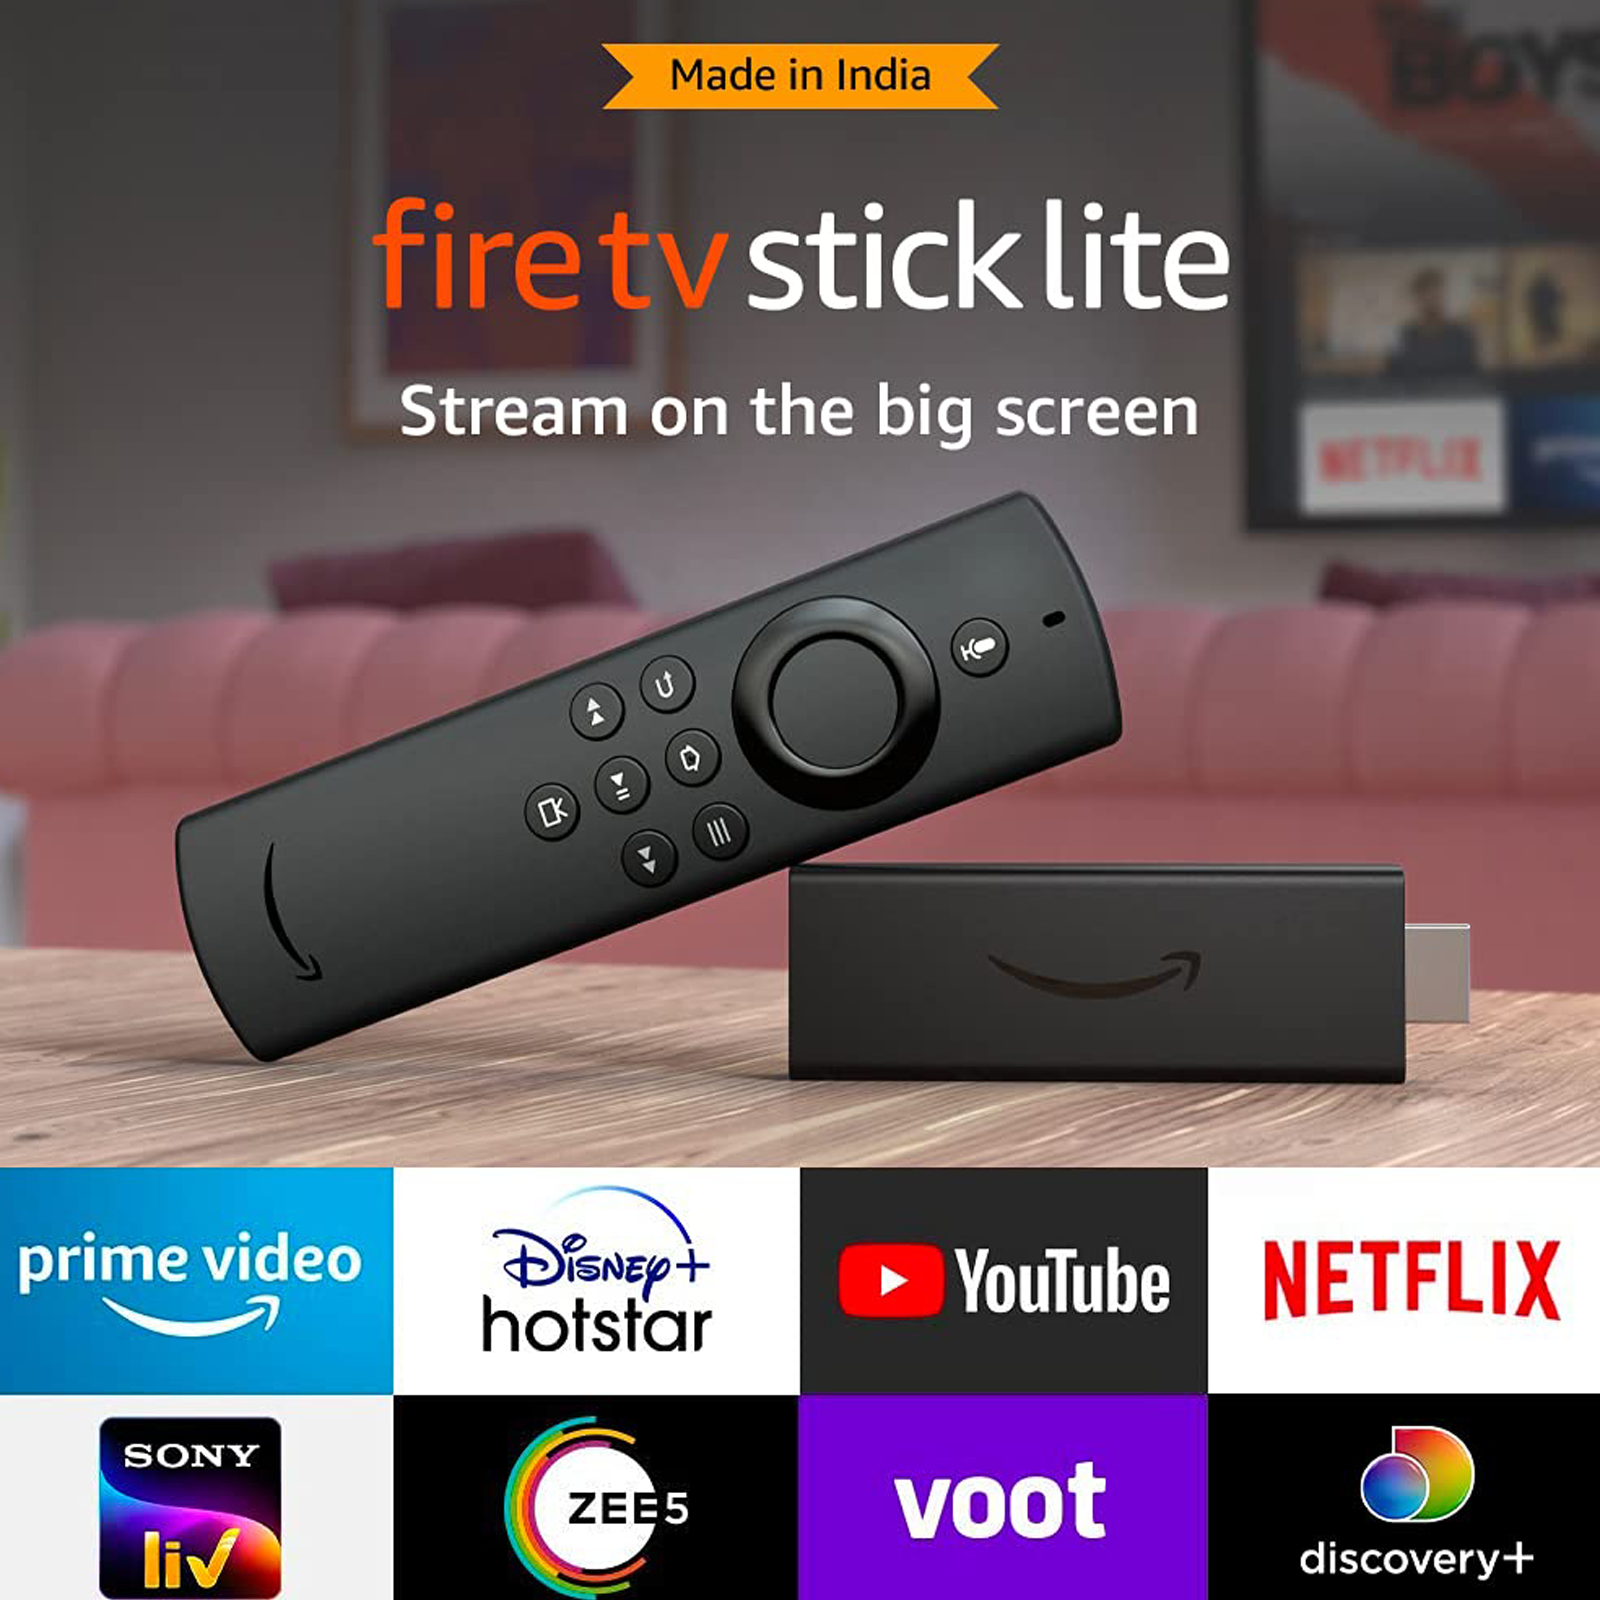 Buy  Fire TV Stick 3rd Gen with Alexa Voice Remote (HD Streaming,  B08R6QR863, Black) Online - Croma